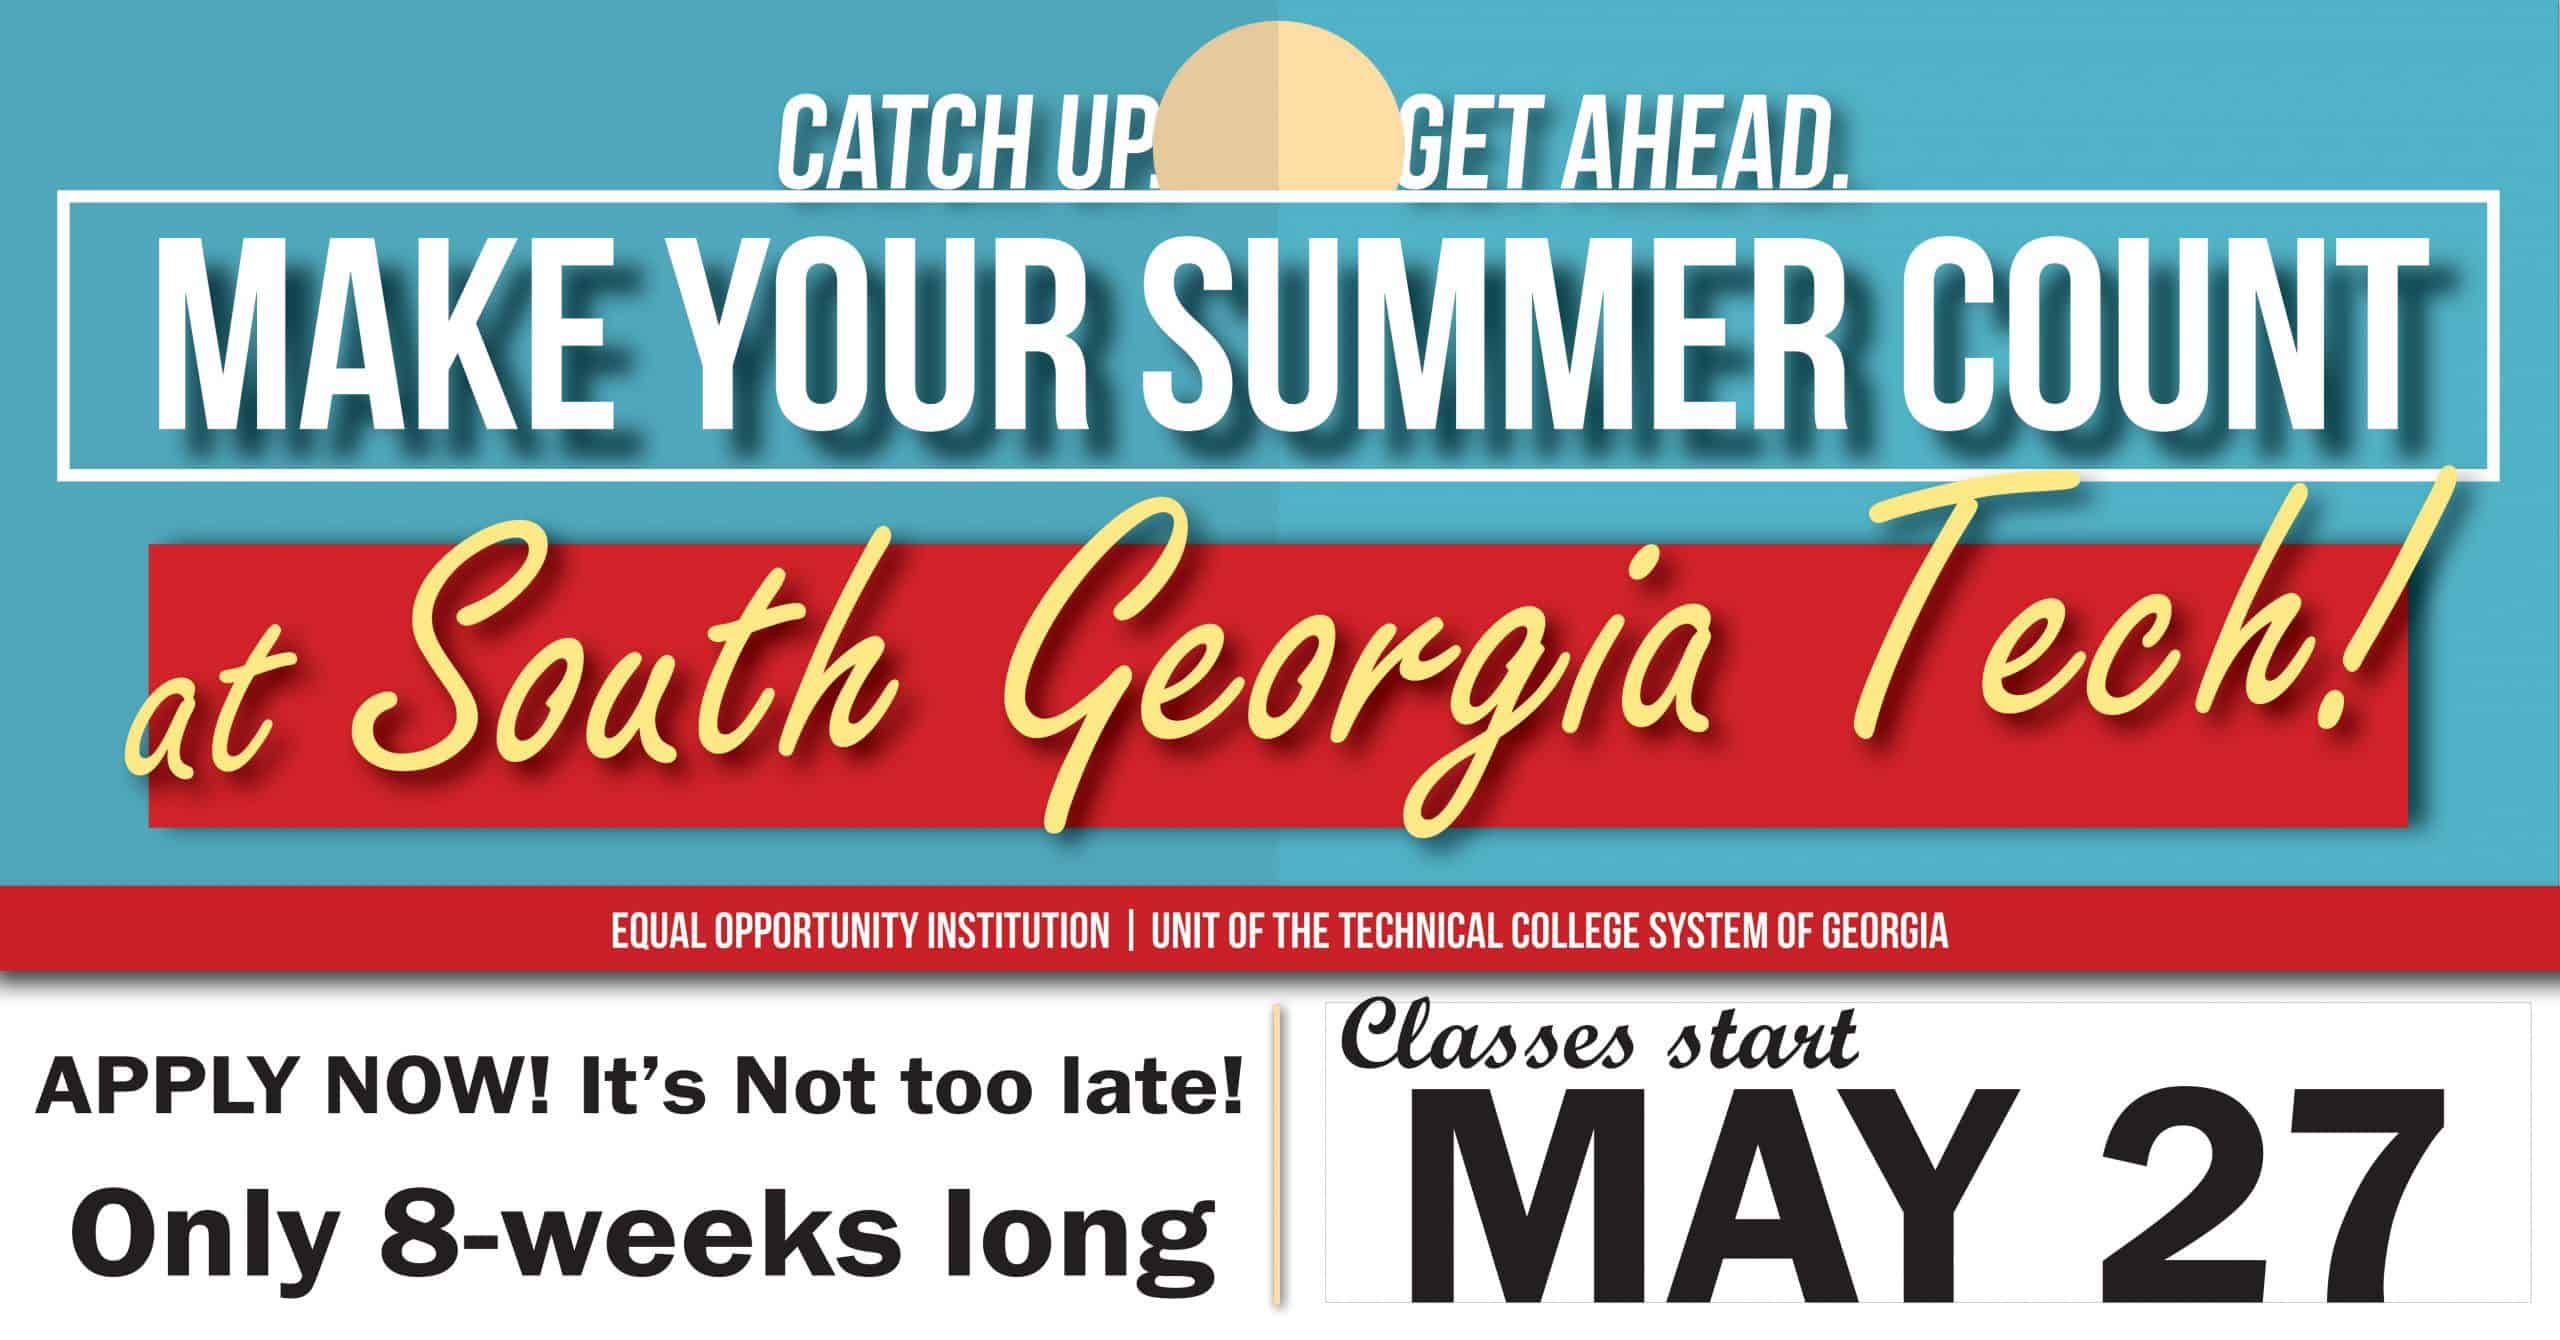 It is not too late to make your summer count at South Georgia Technical College. Classes start May 27th and only last eight weeks. It is a great time to look at expanding or exploring new career options.